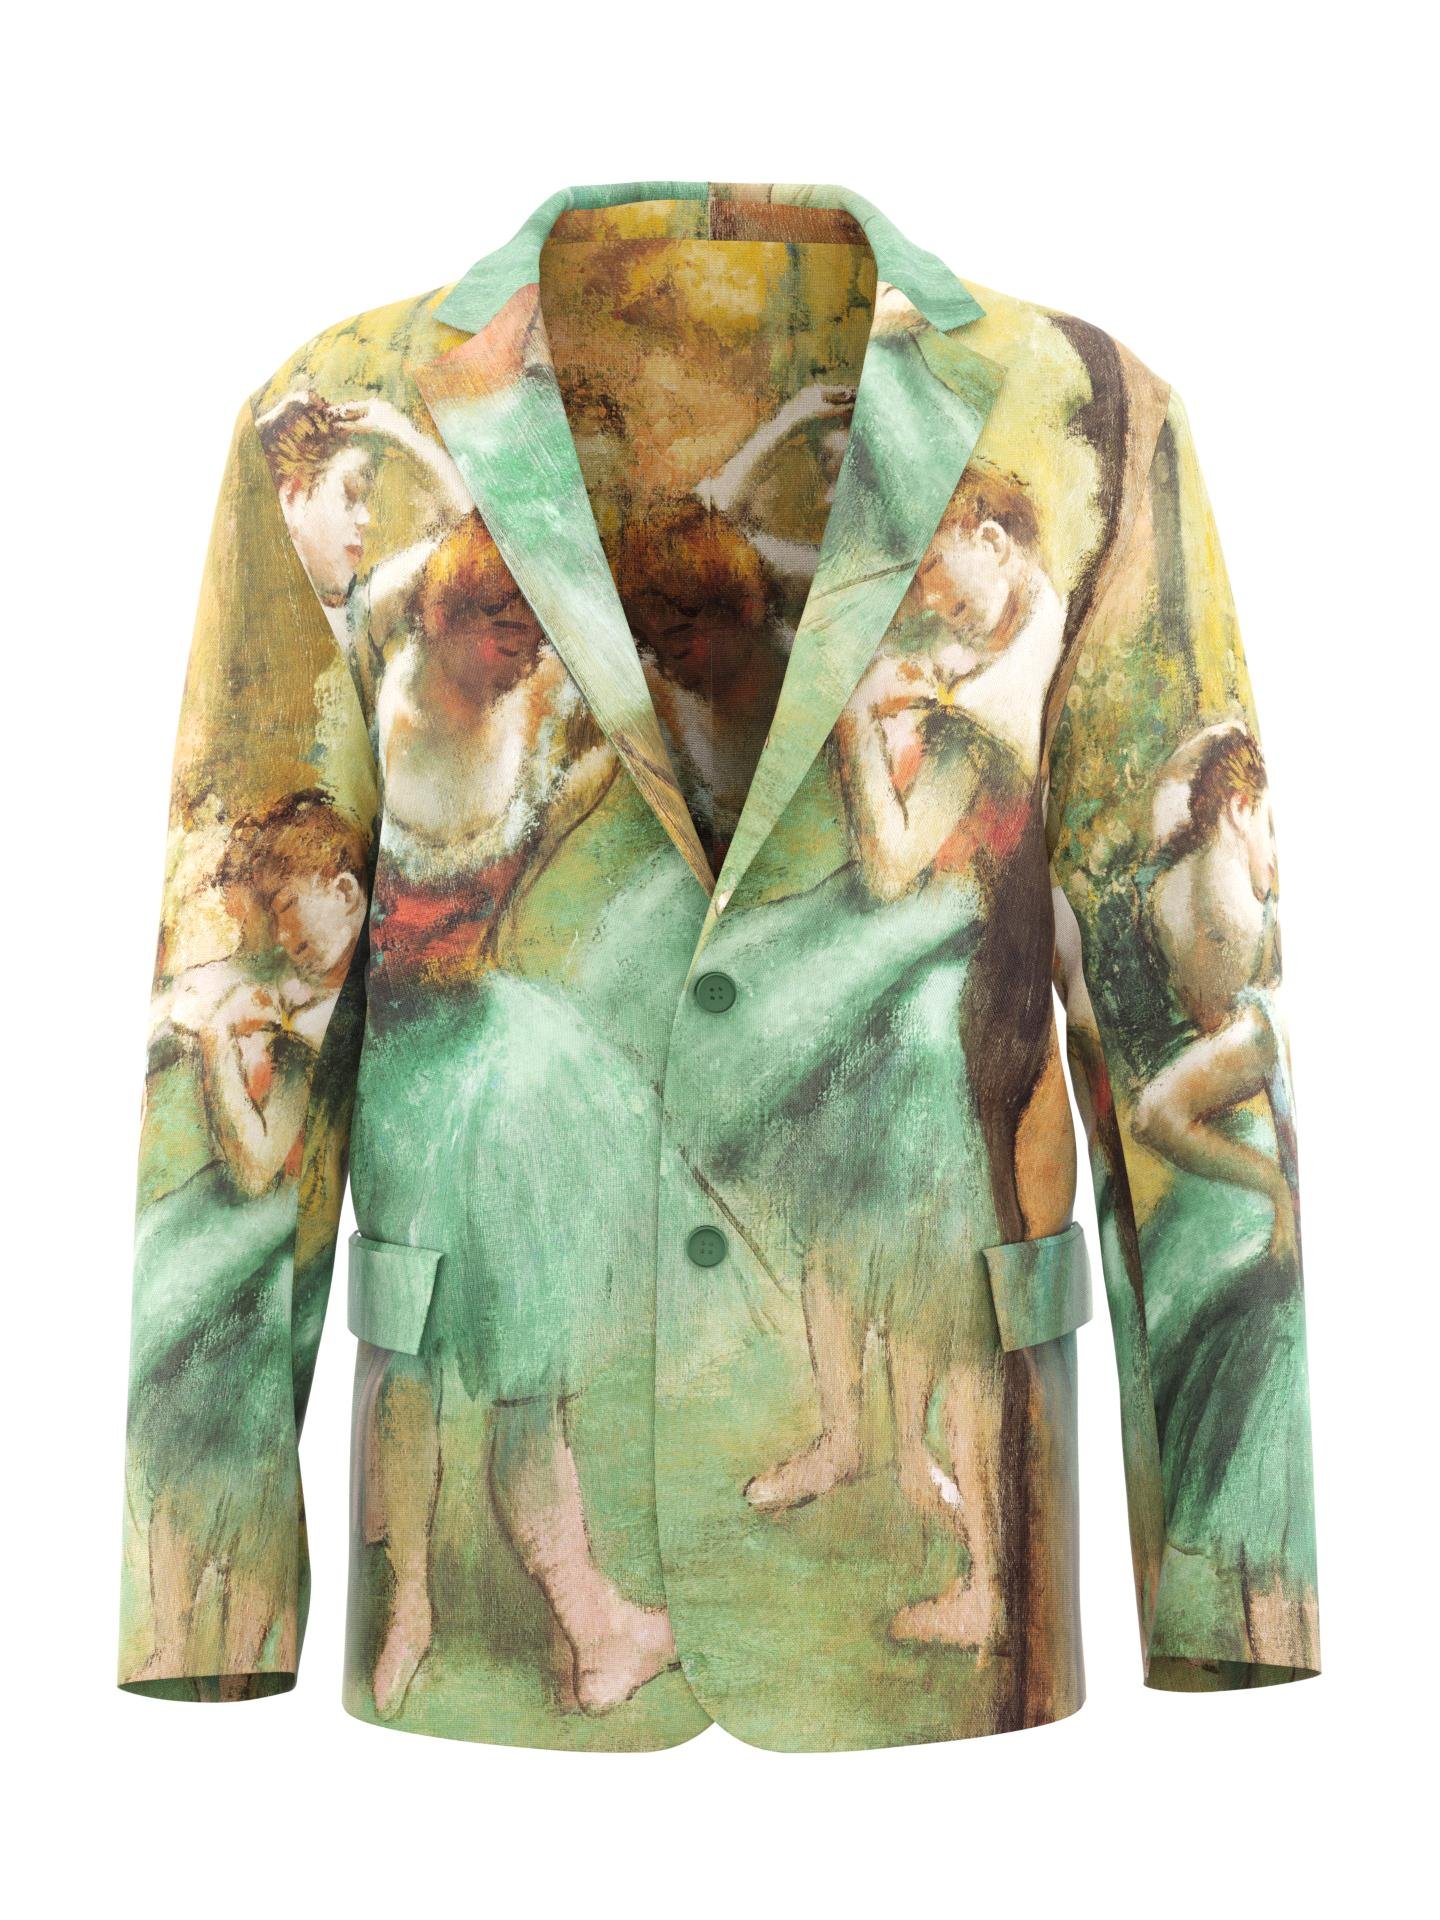 Blazer - Dancers Pink and Green by DRESSX